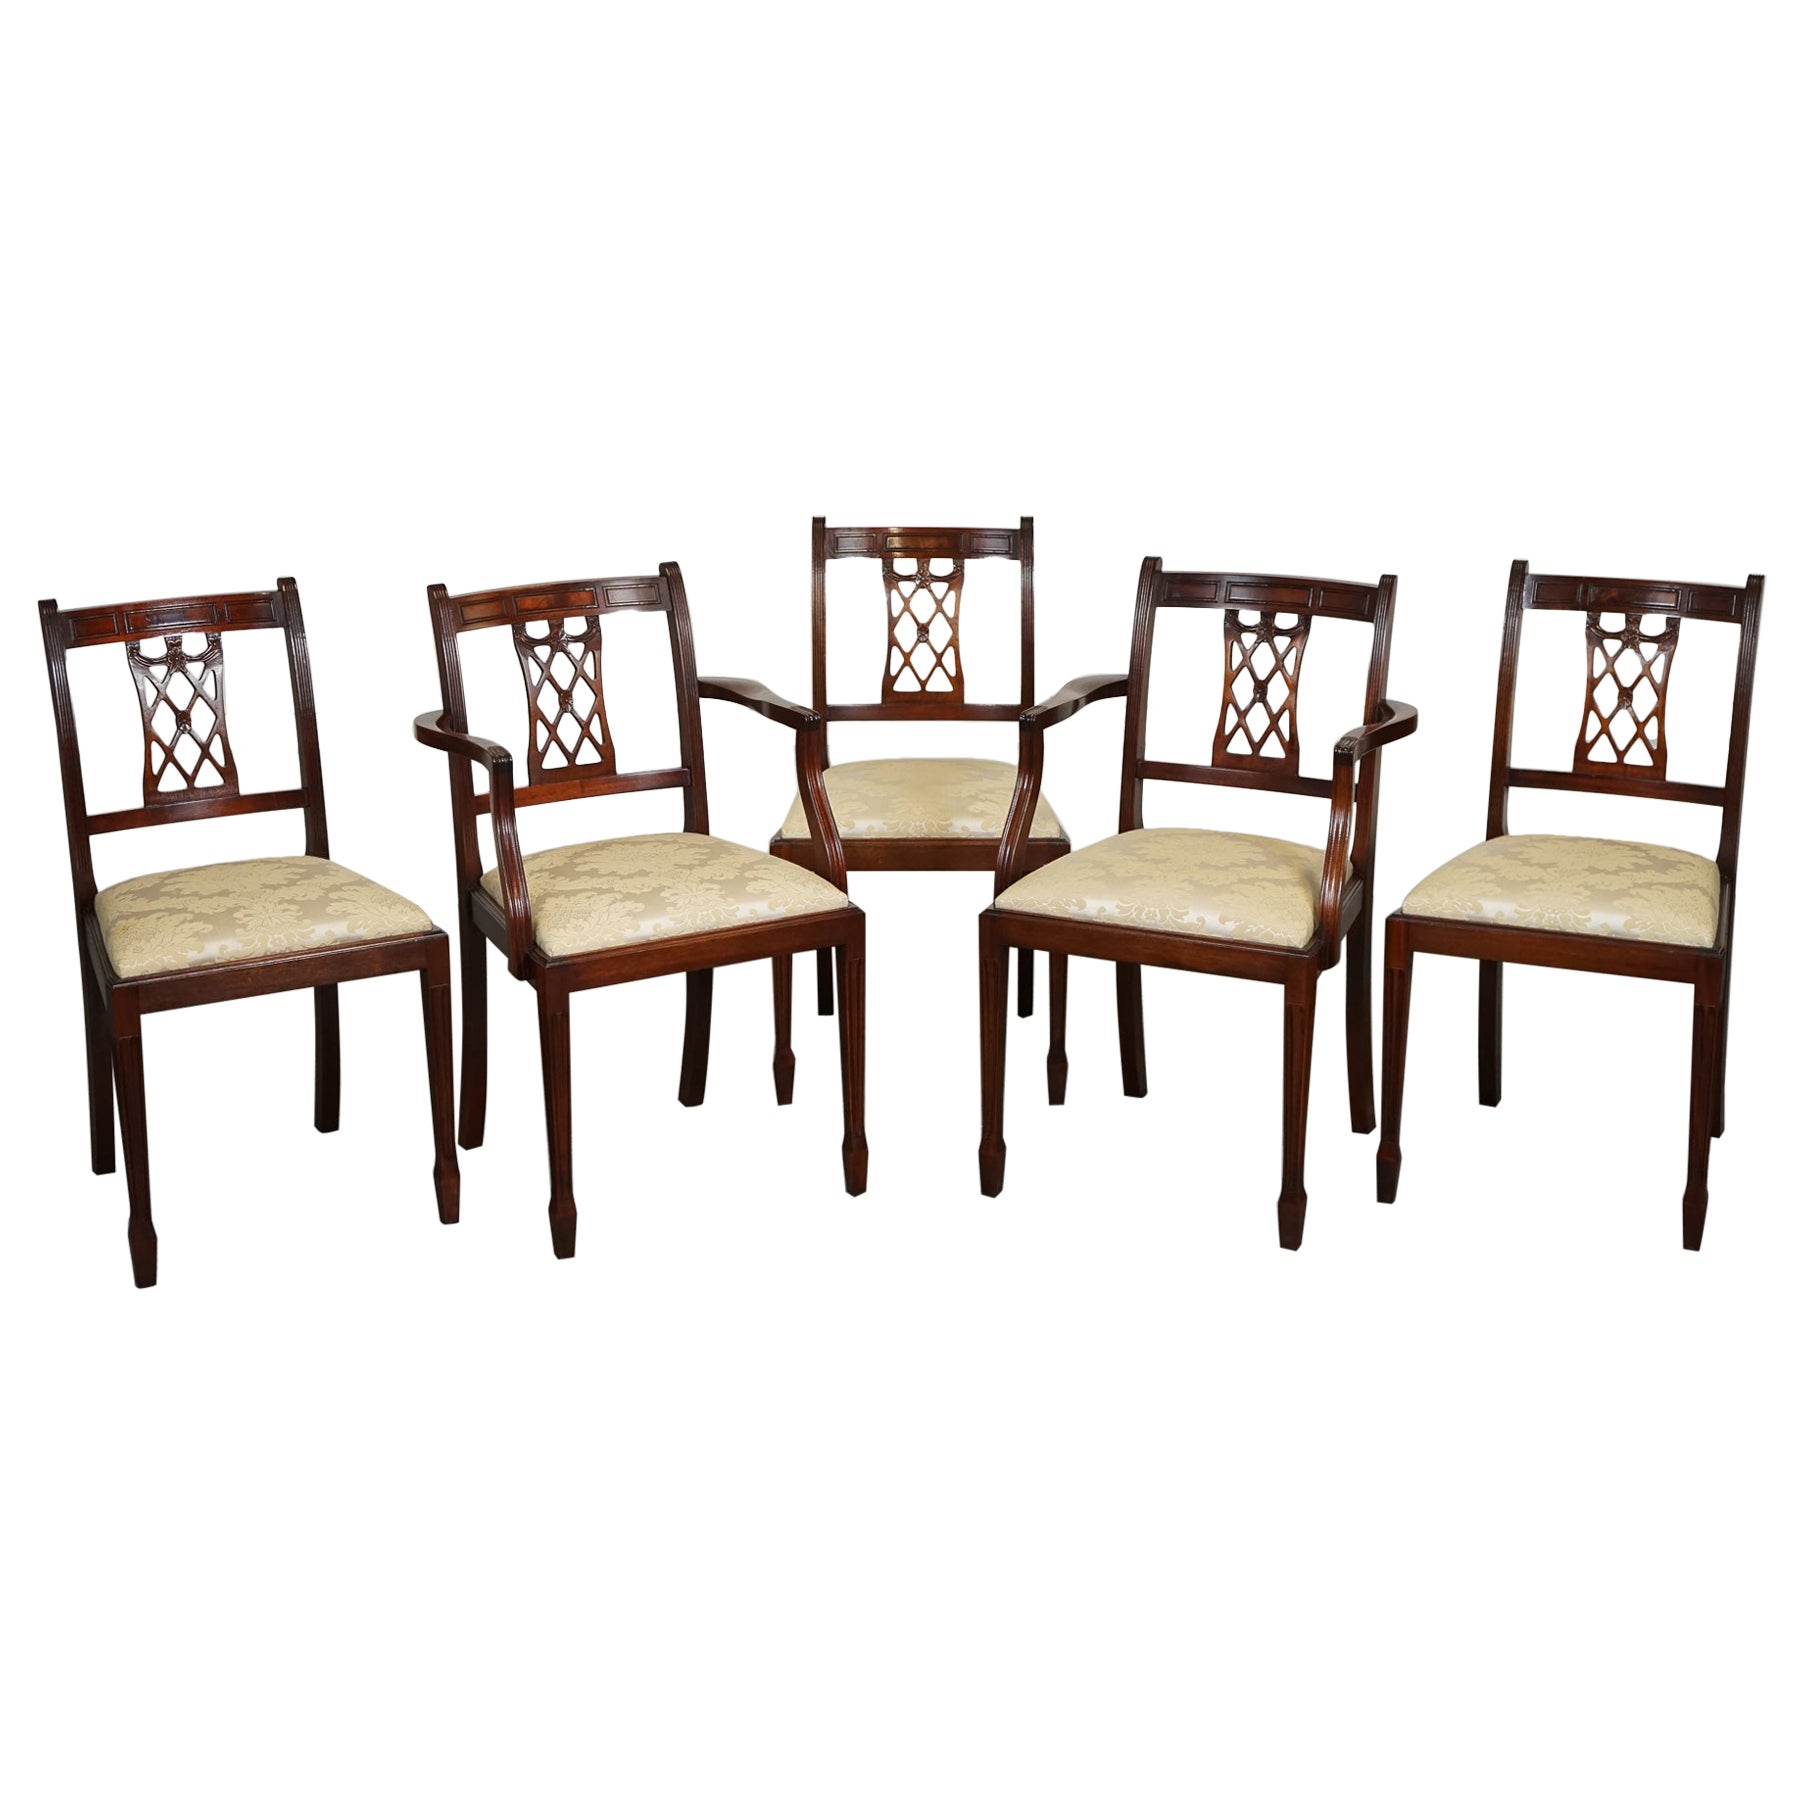 HEPPLEWHITE STYLE BEVAN FUNNELL SET OF 5 DINING CHAiRS CREAM UPHOLSTERED SEATS